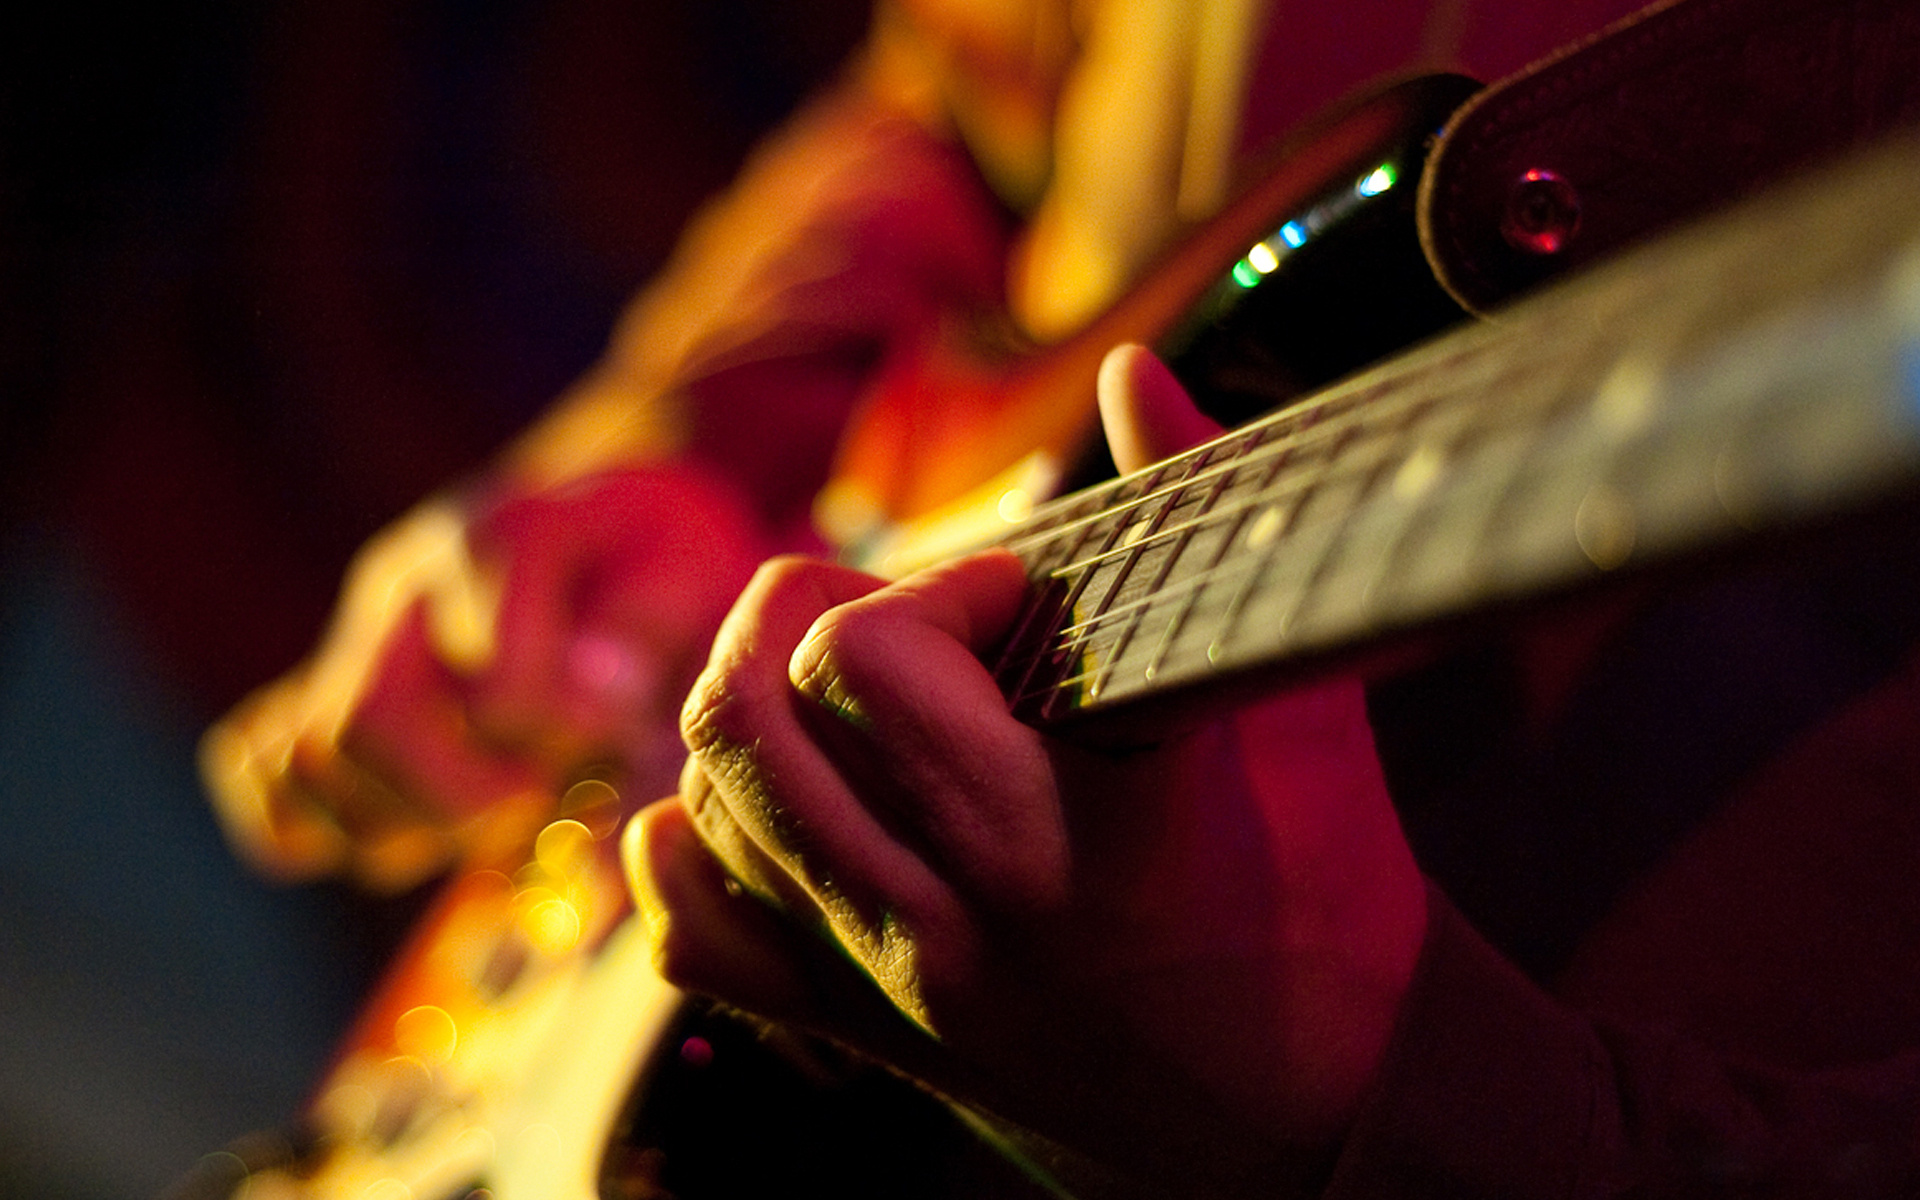 Guitar player, Musical instrument, Passion for music, Creative expression, 1920x1200 HD Desktop